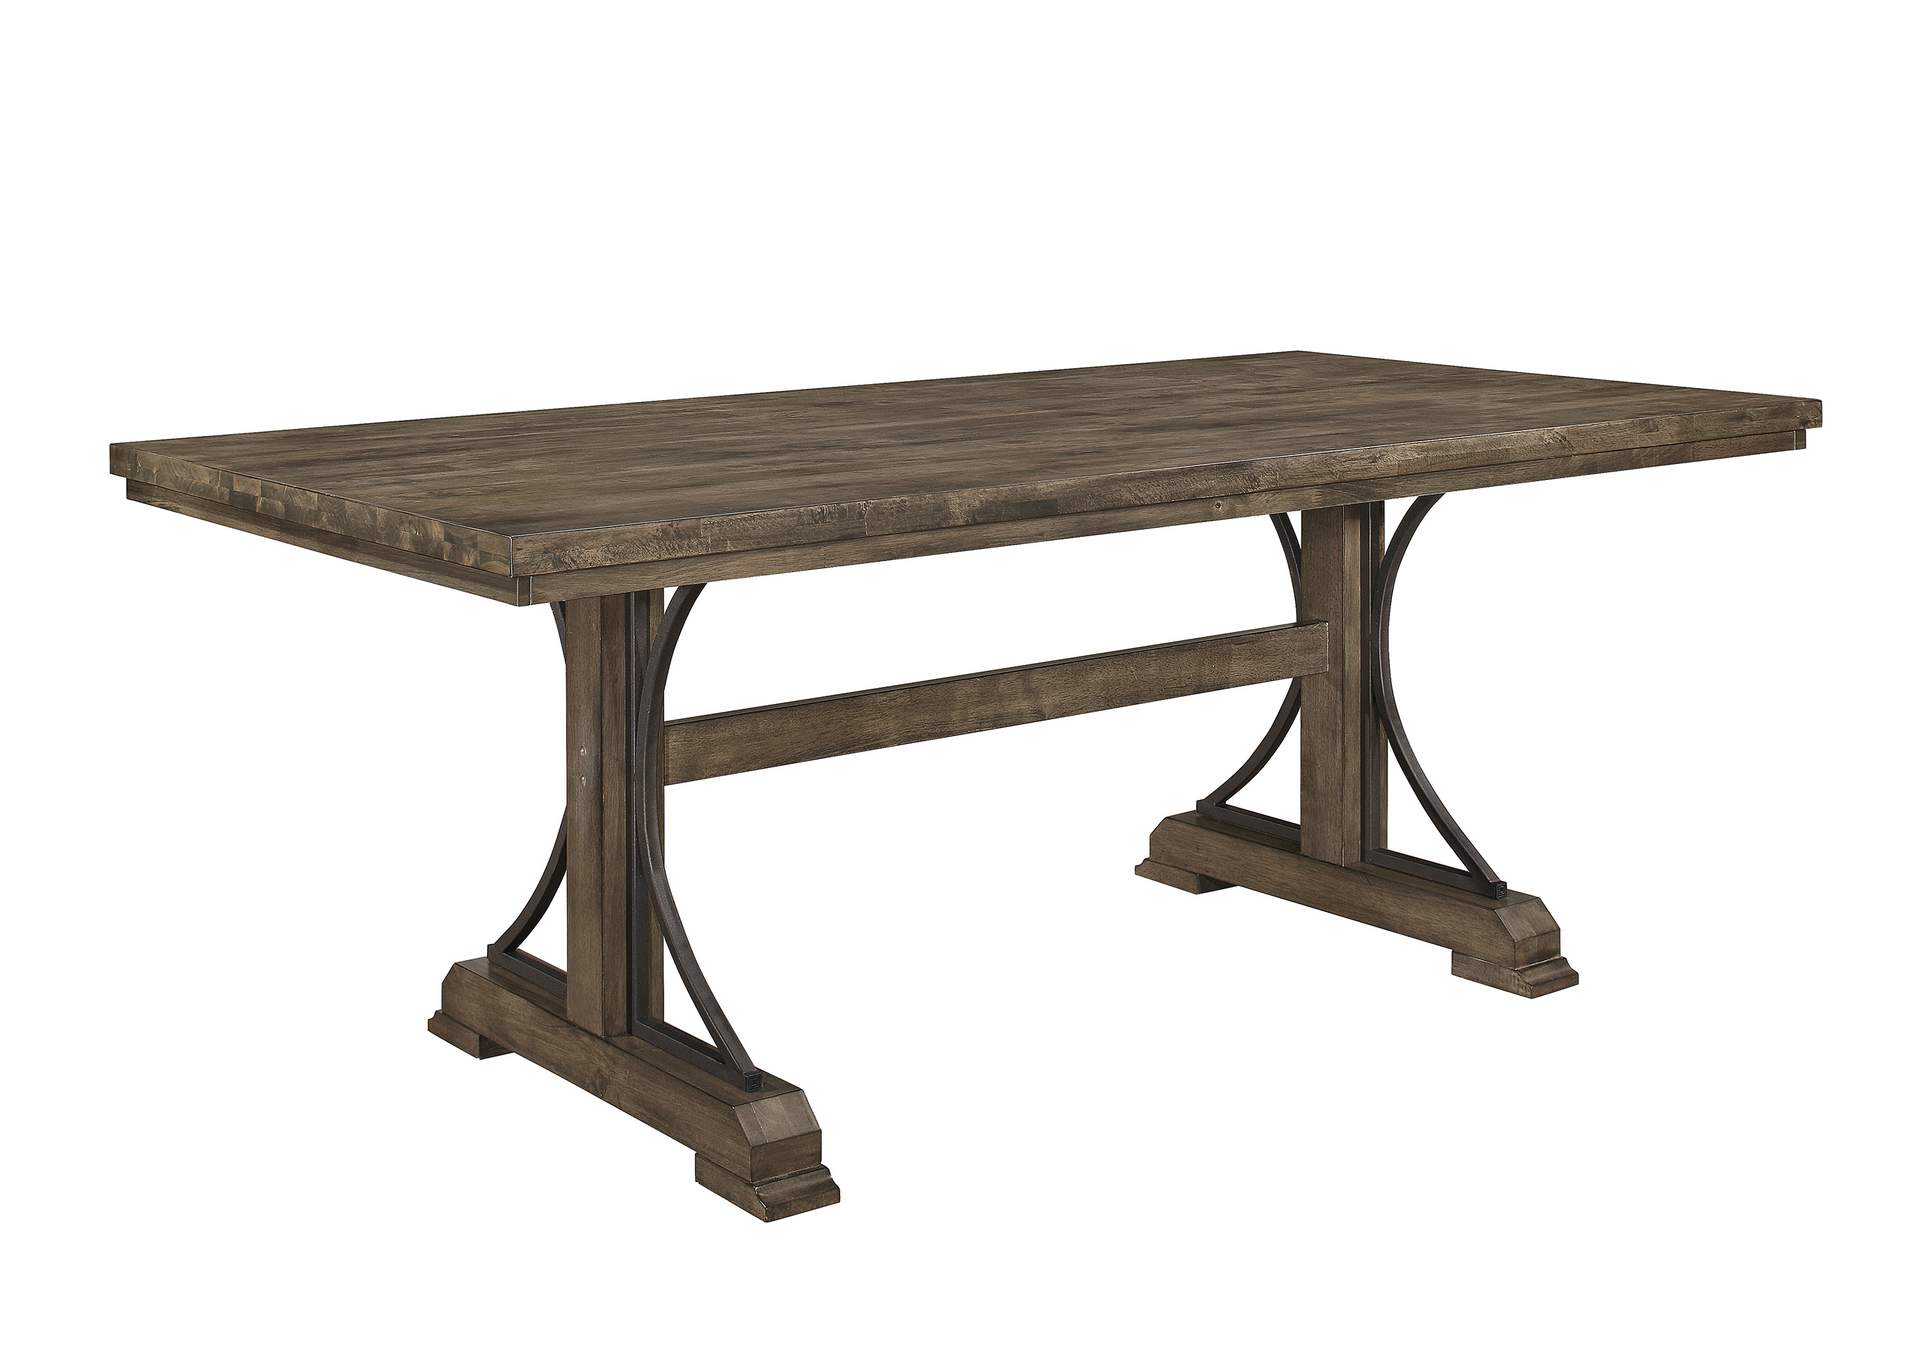 Quincy Rect Dining Table,Crown Mark